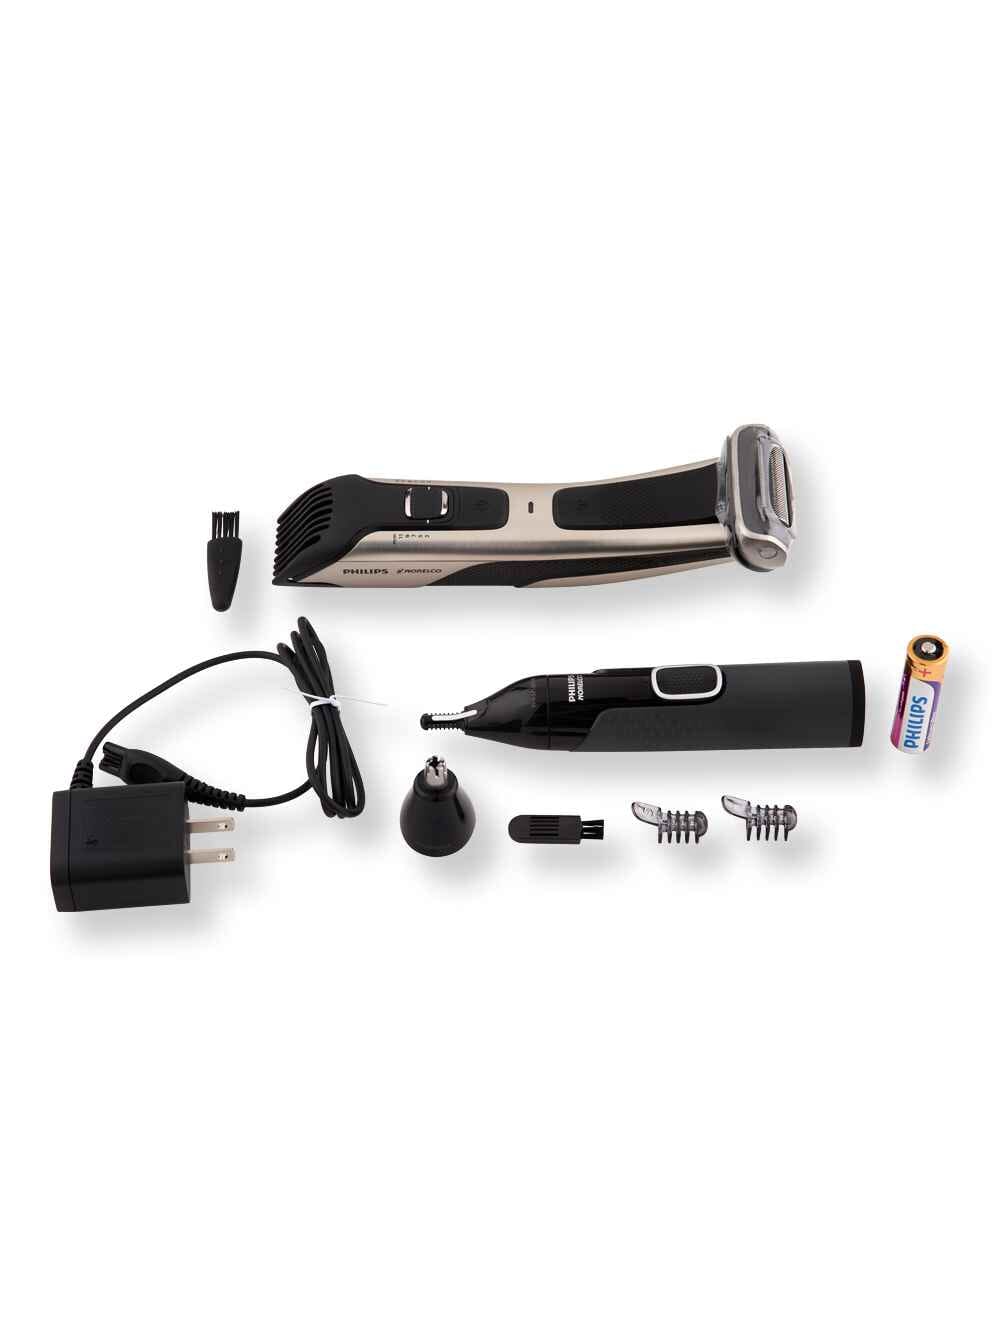 Philips Norelco Philips Norelco BG7030/49 Bodygroom Series 7000 & NT3600/42 Nose Trimmer 3000 Razors, Blades, & Trimmers 